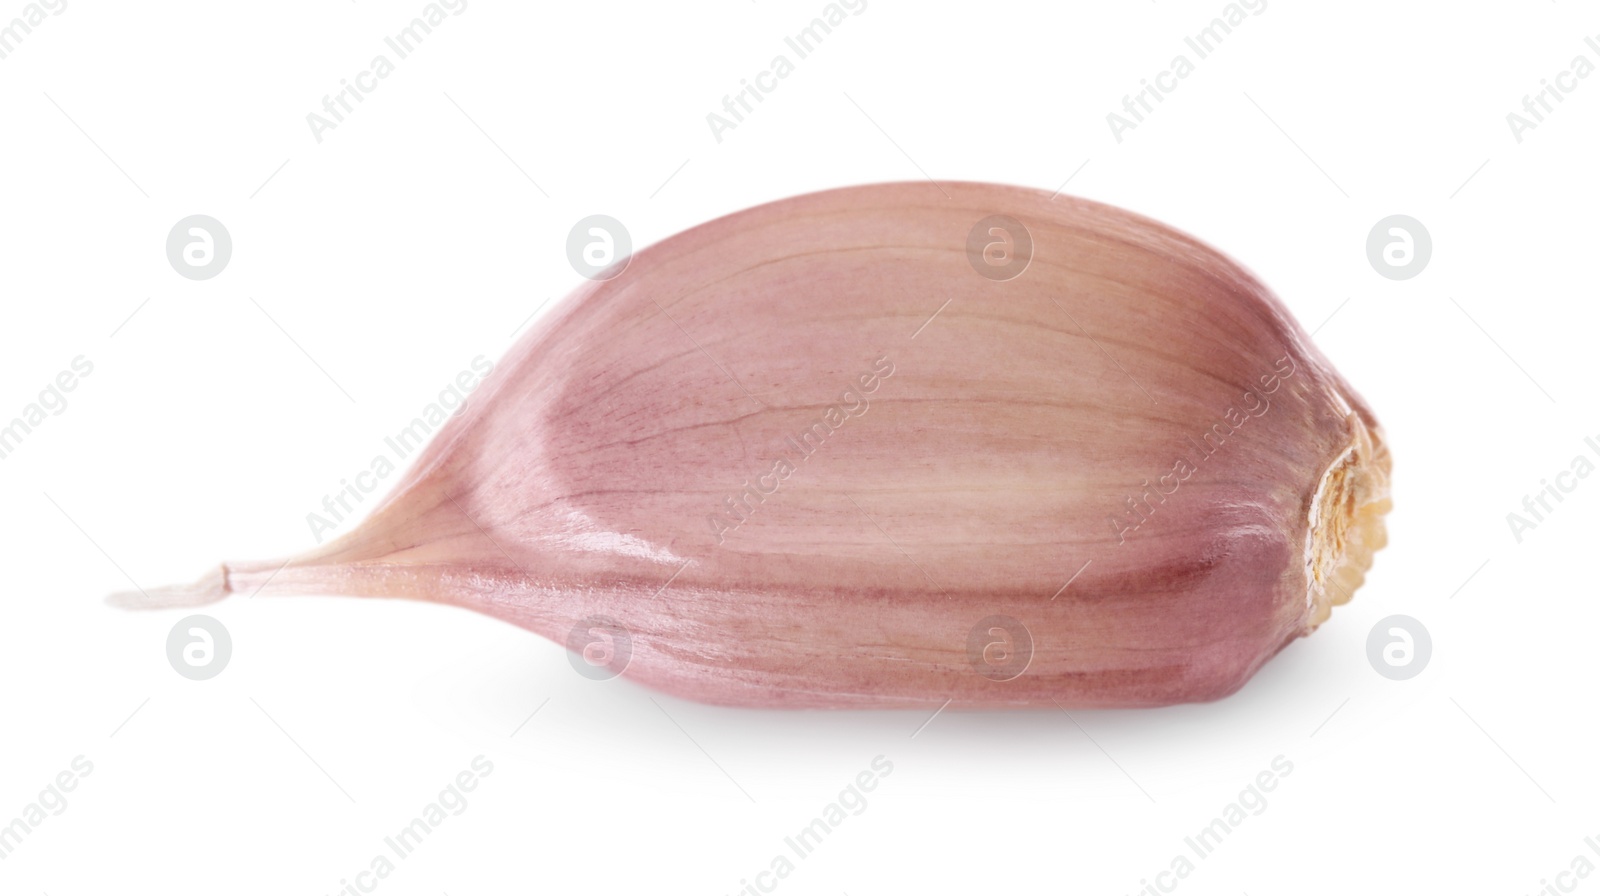 Photo of One unpeeled clove of fresh garlic isolated on white